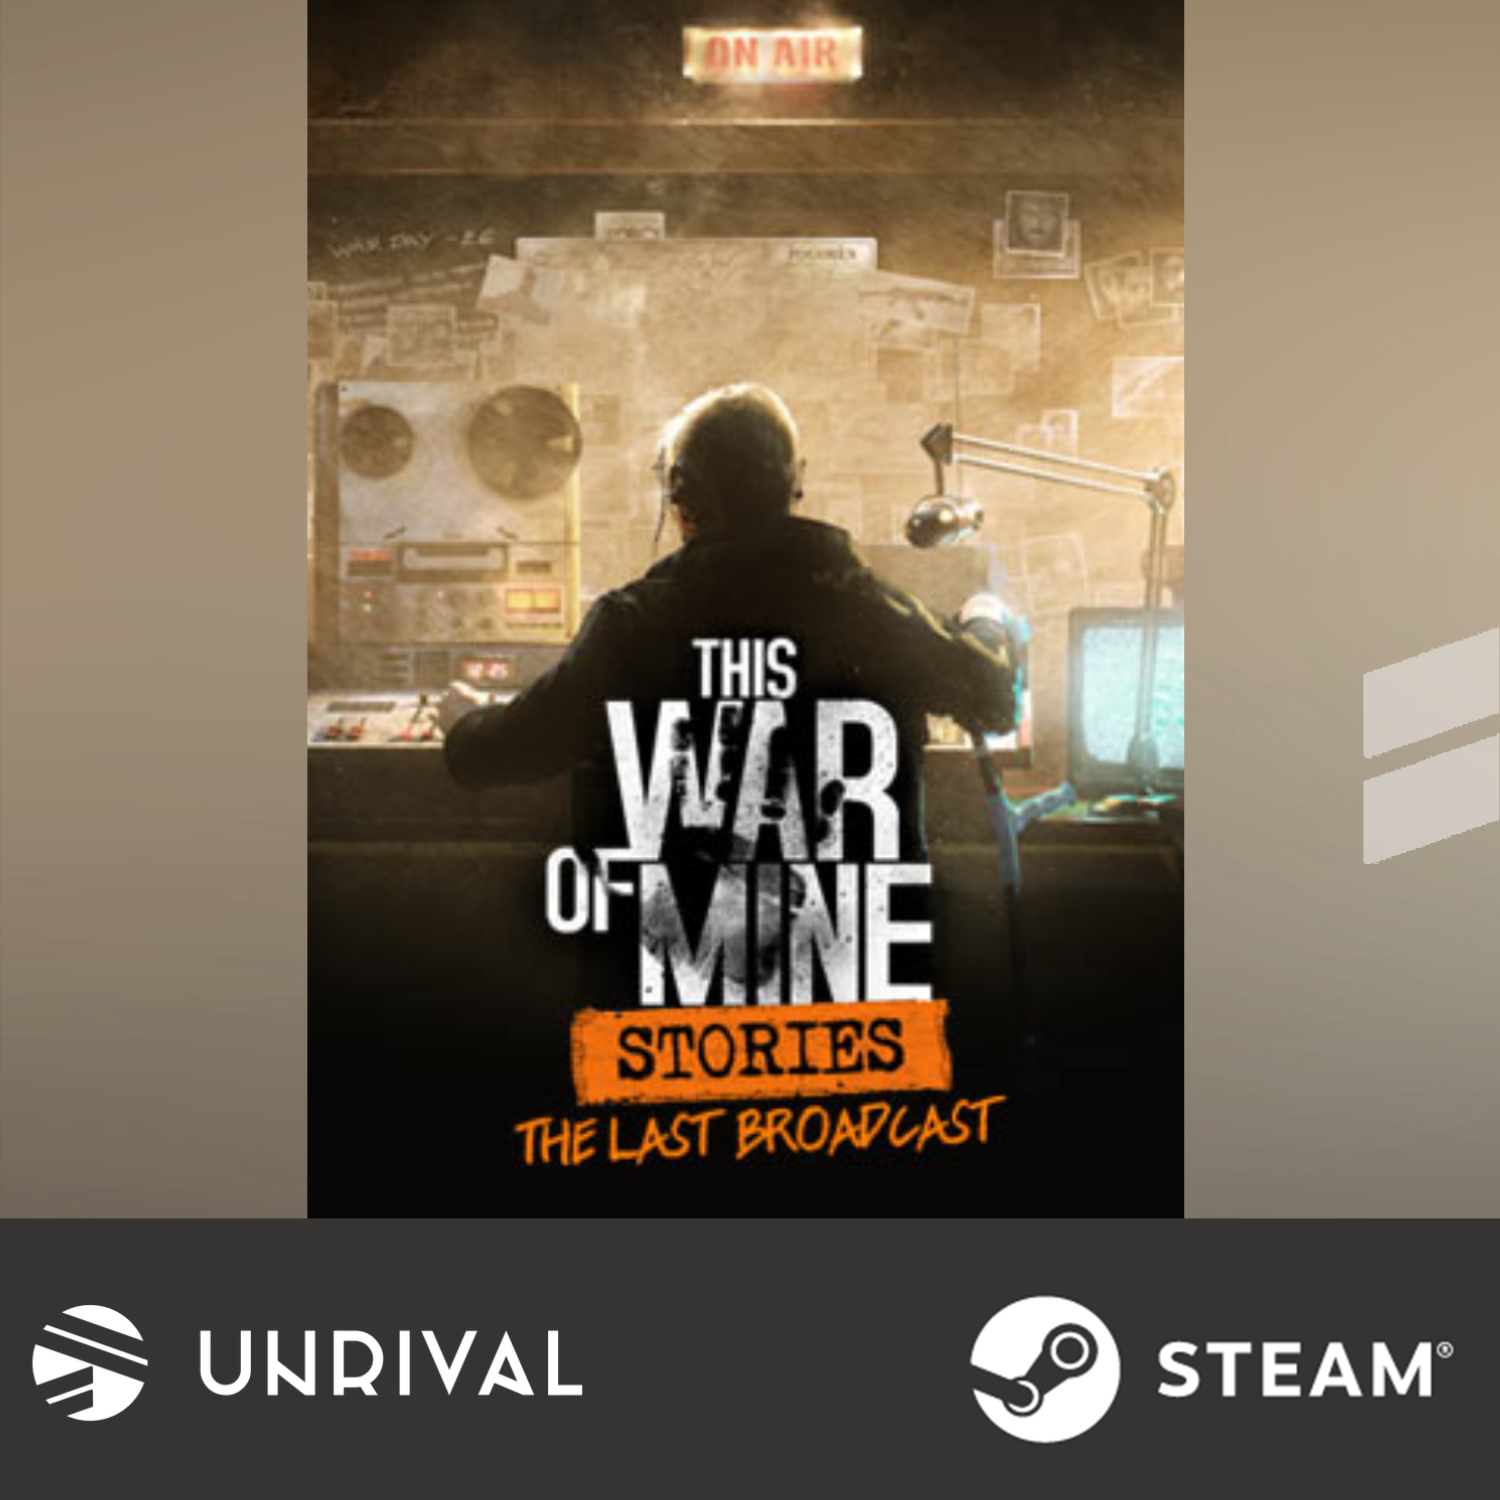 [Hot Sale] This War of Mine: Stories - The Last Broadcast PC Digital Download Game (Single Player) - Unrival